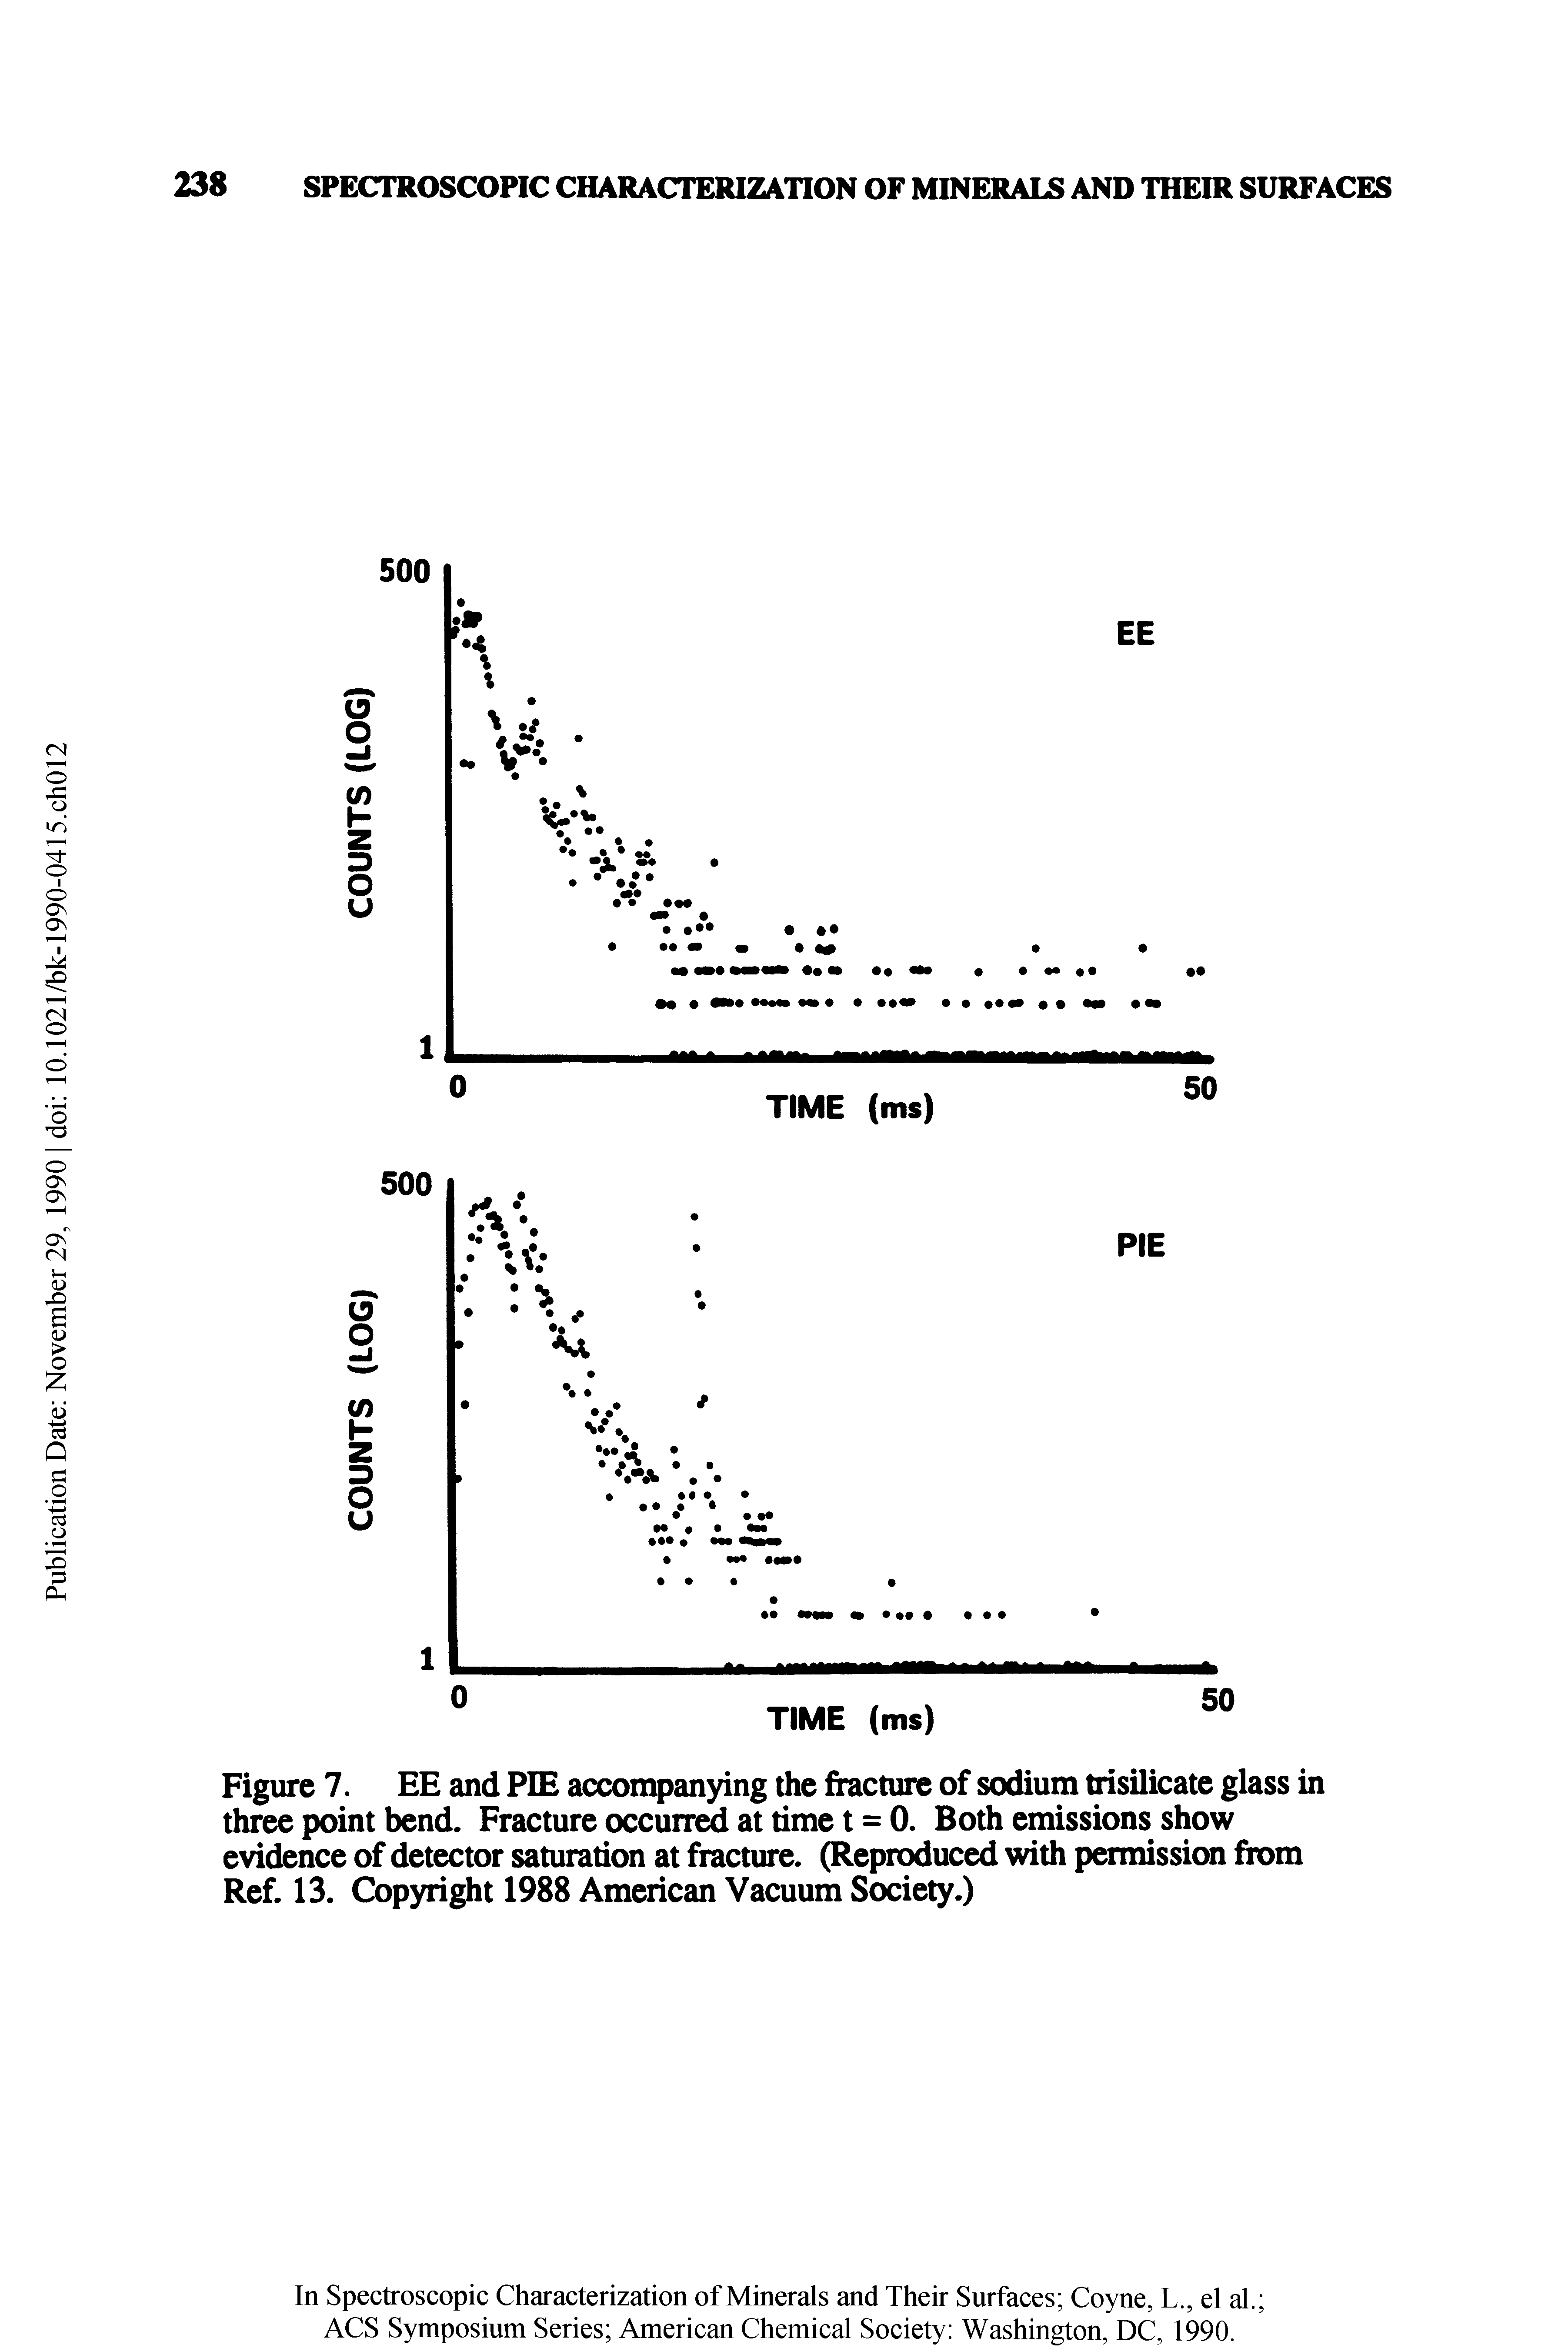 Figure 7. EE and PIE accompanying the fracture of sodium trisilicate glass in three point bend. Fracture occurred at time t = 0. Both emissions show evidence of detector saturation at fracture. (Reproduced with permission from Ref. 13. Copyright 1988 American Vacuum Society.)...